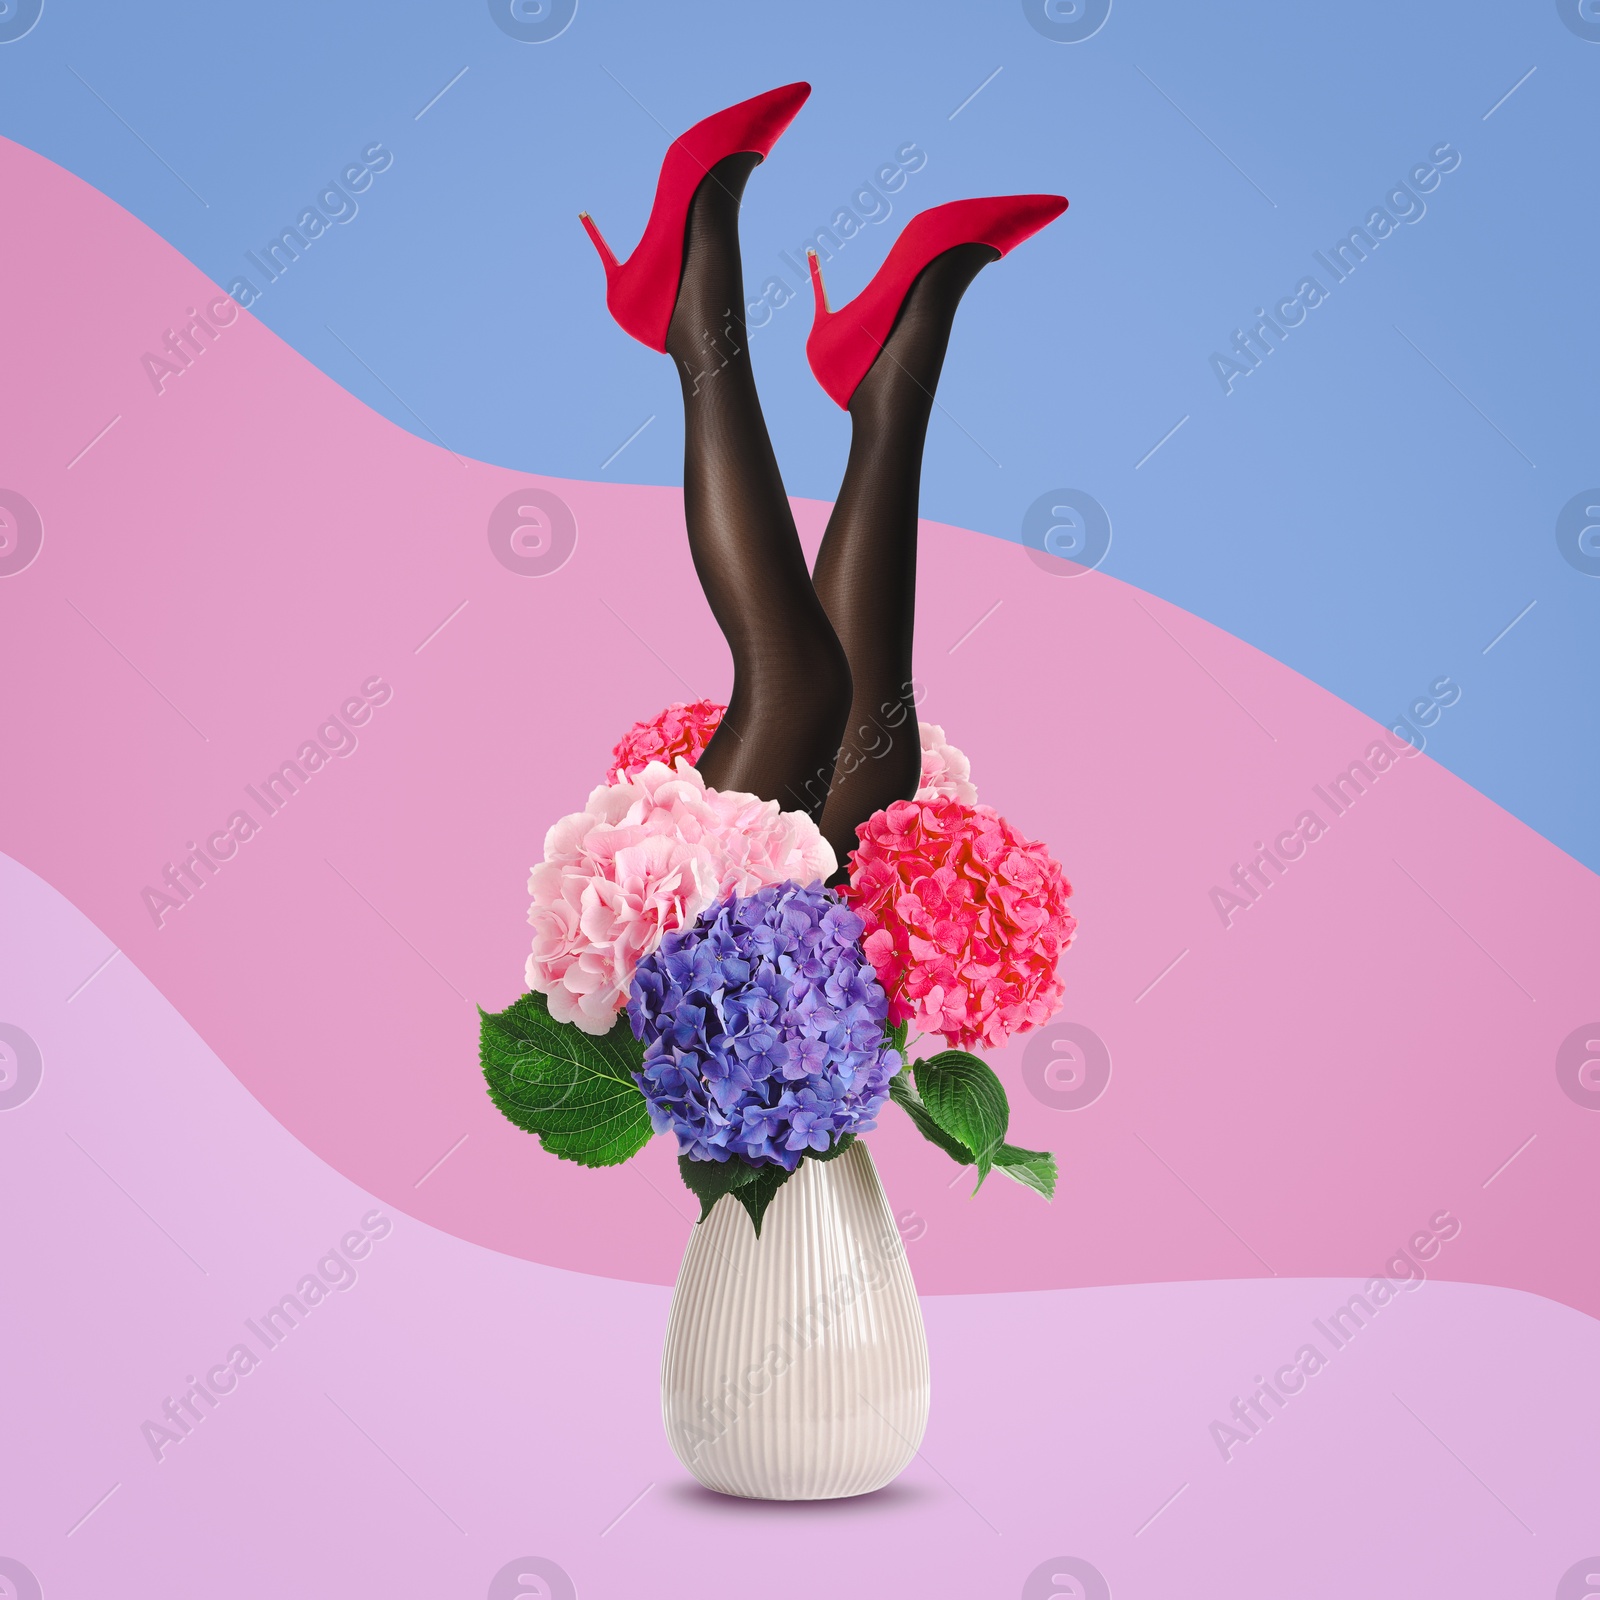 Image of Creative art collage about femininity, style and fashion. Woman sticking out of vase with amazing hydrangea flowers on bright background